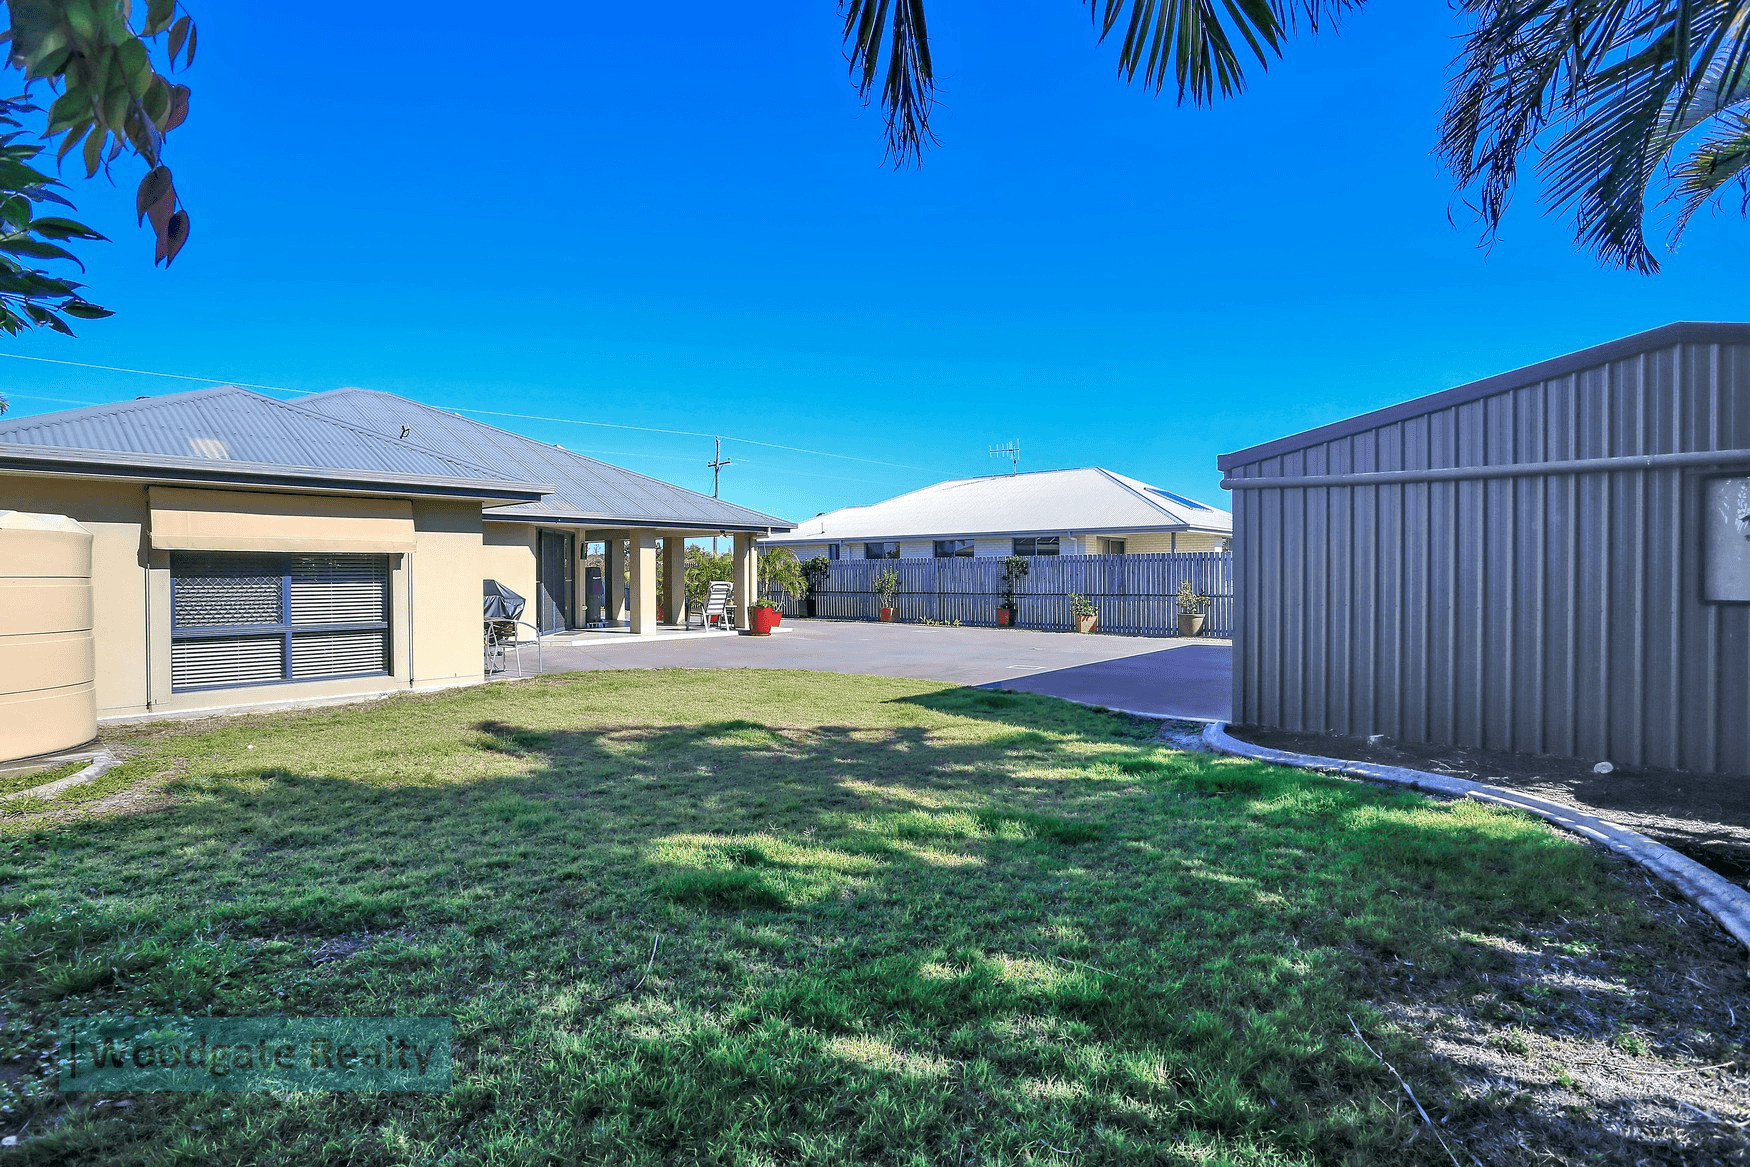 35 Frizzells Rd, Woodgate, QLD 4660